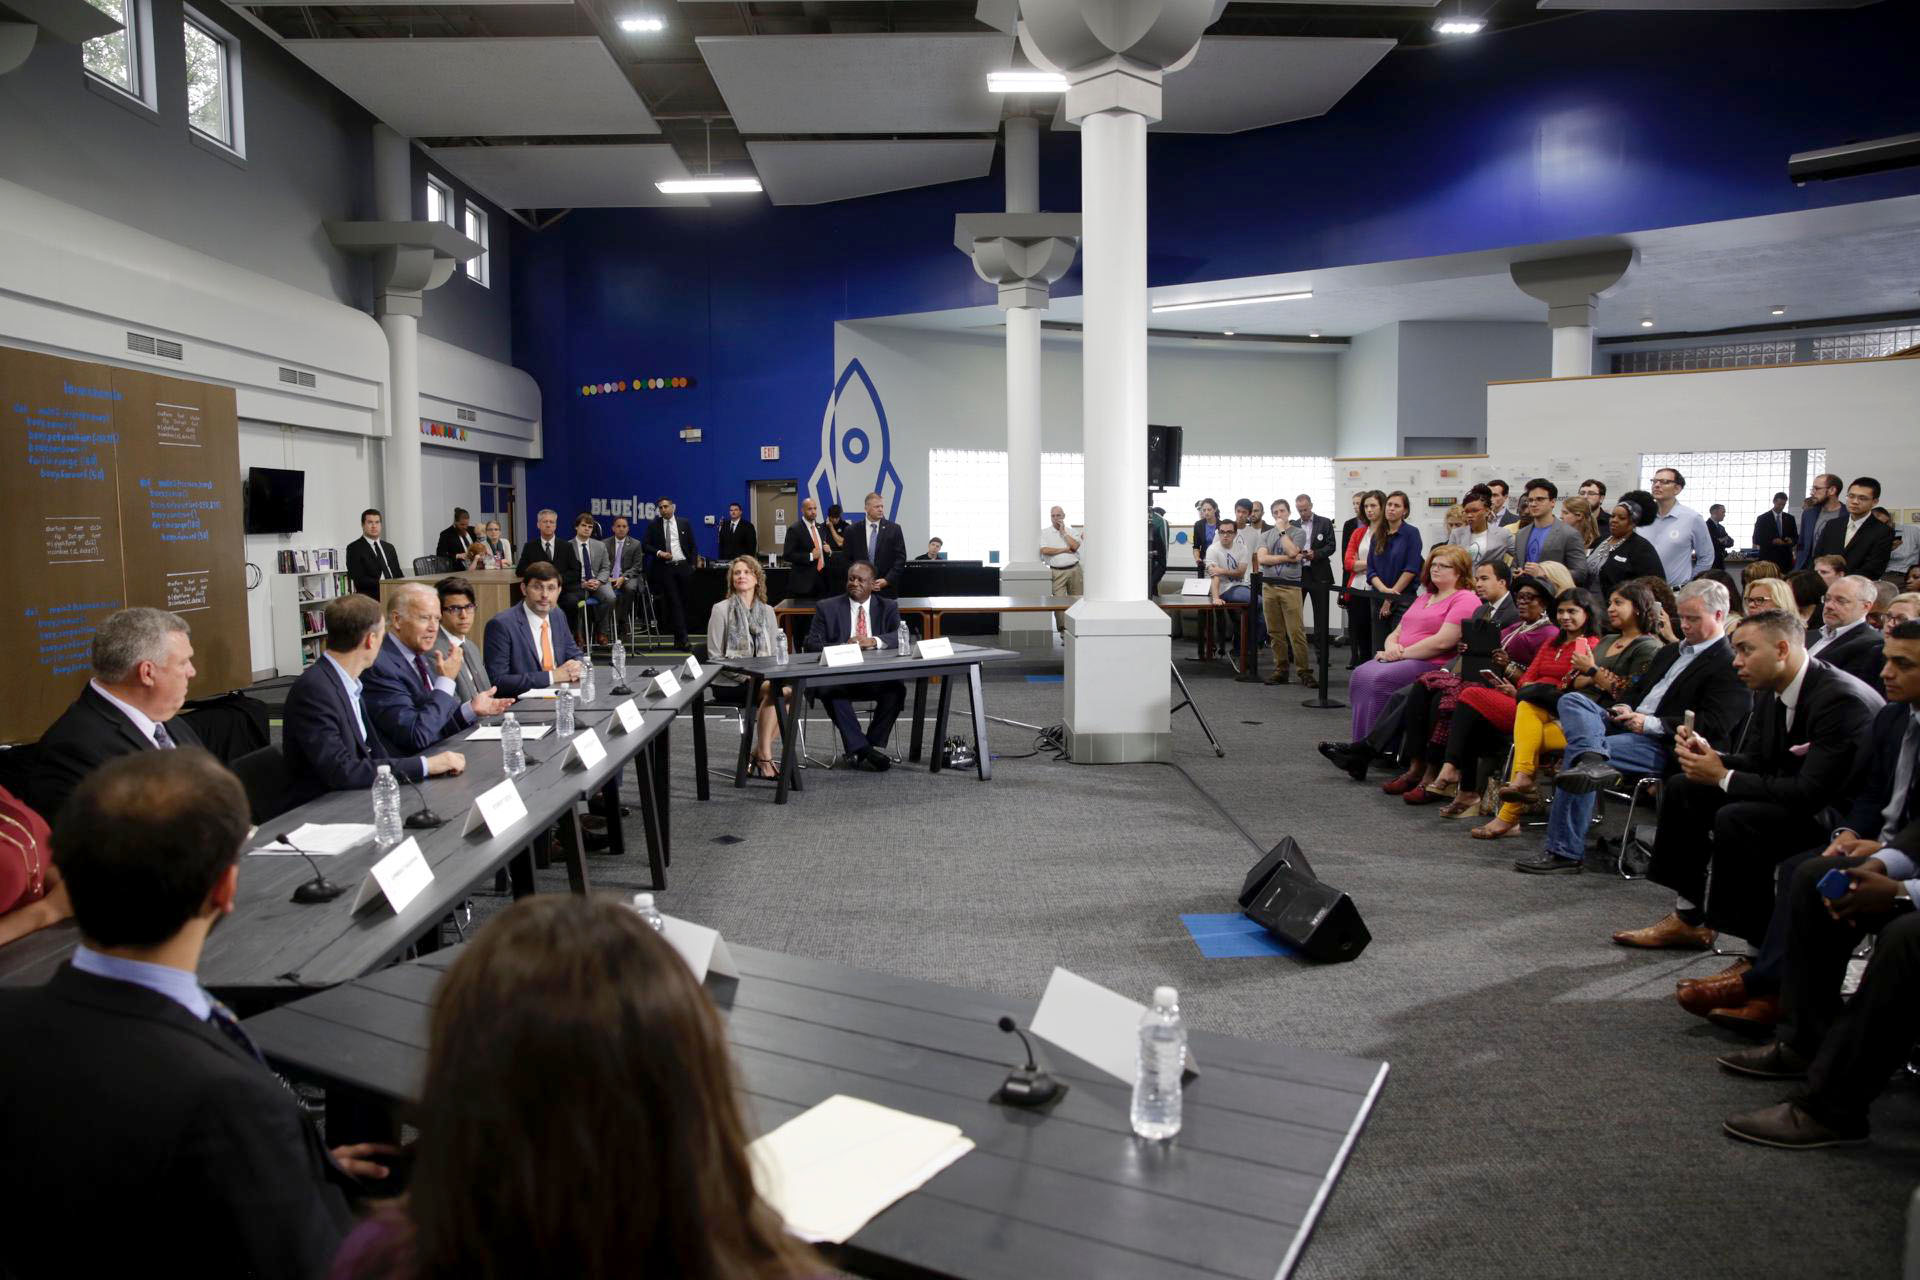 Vice President Joe Biden gives remarks at a roundtable on a tech hire initiative at the LaunchCode Mentor Center in St. Louis, Missouri, Sept. 9, 2016. (Official White House Photo by David Lienemann) 